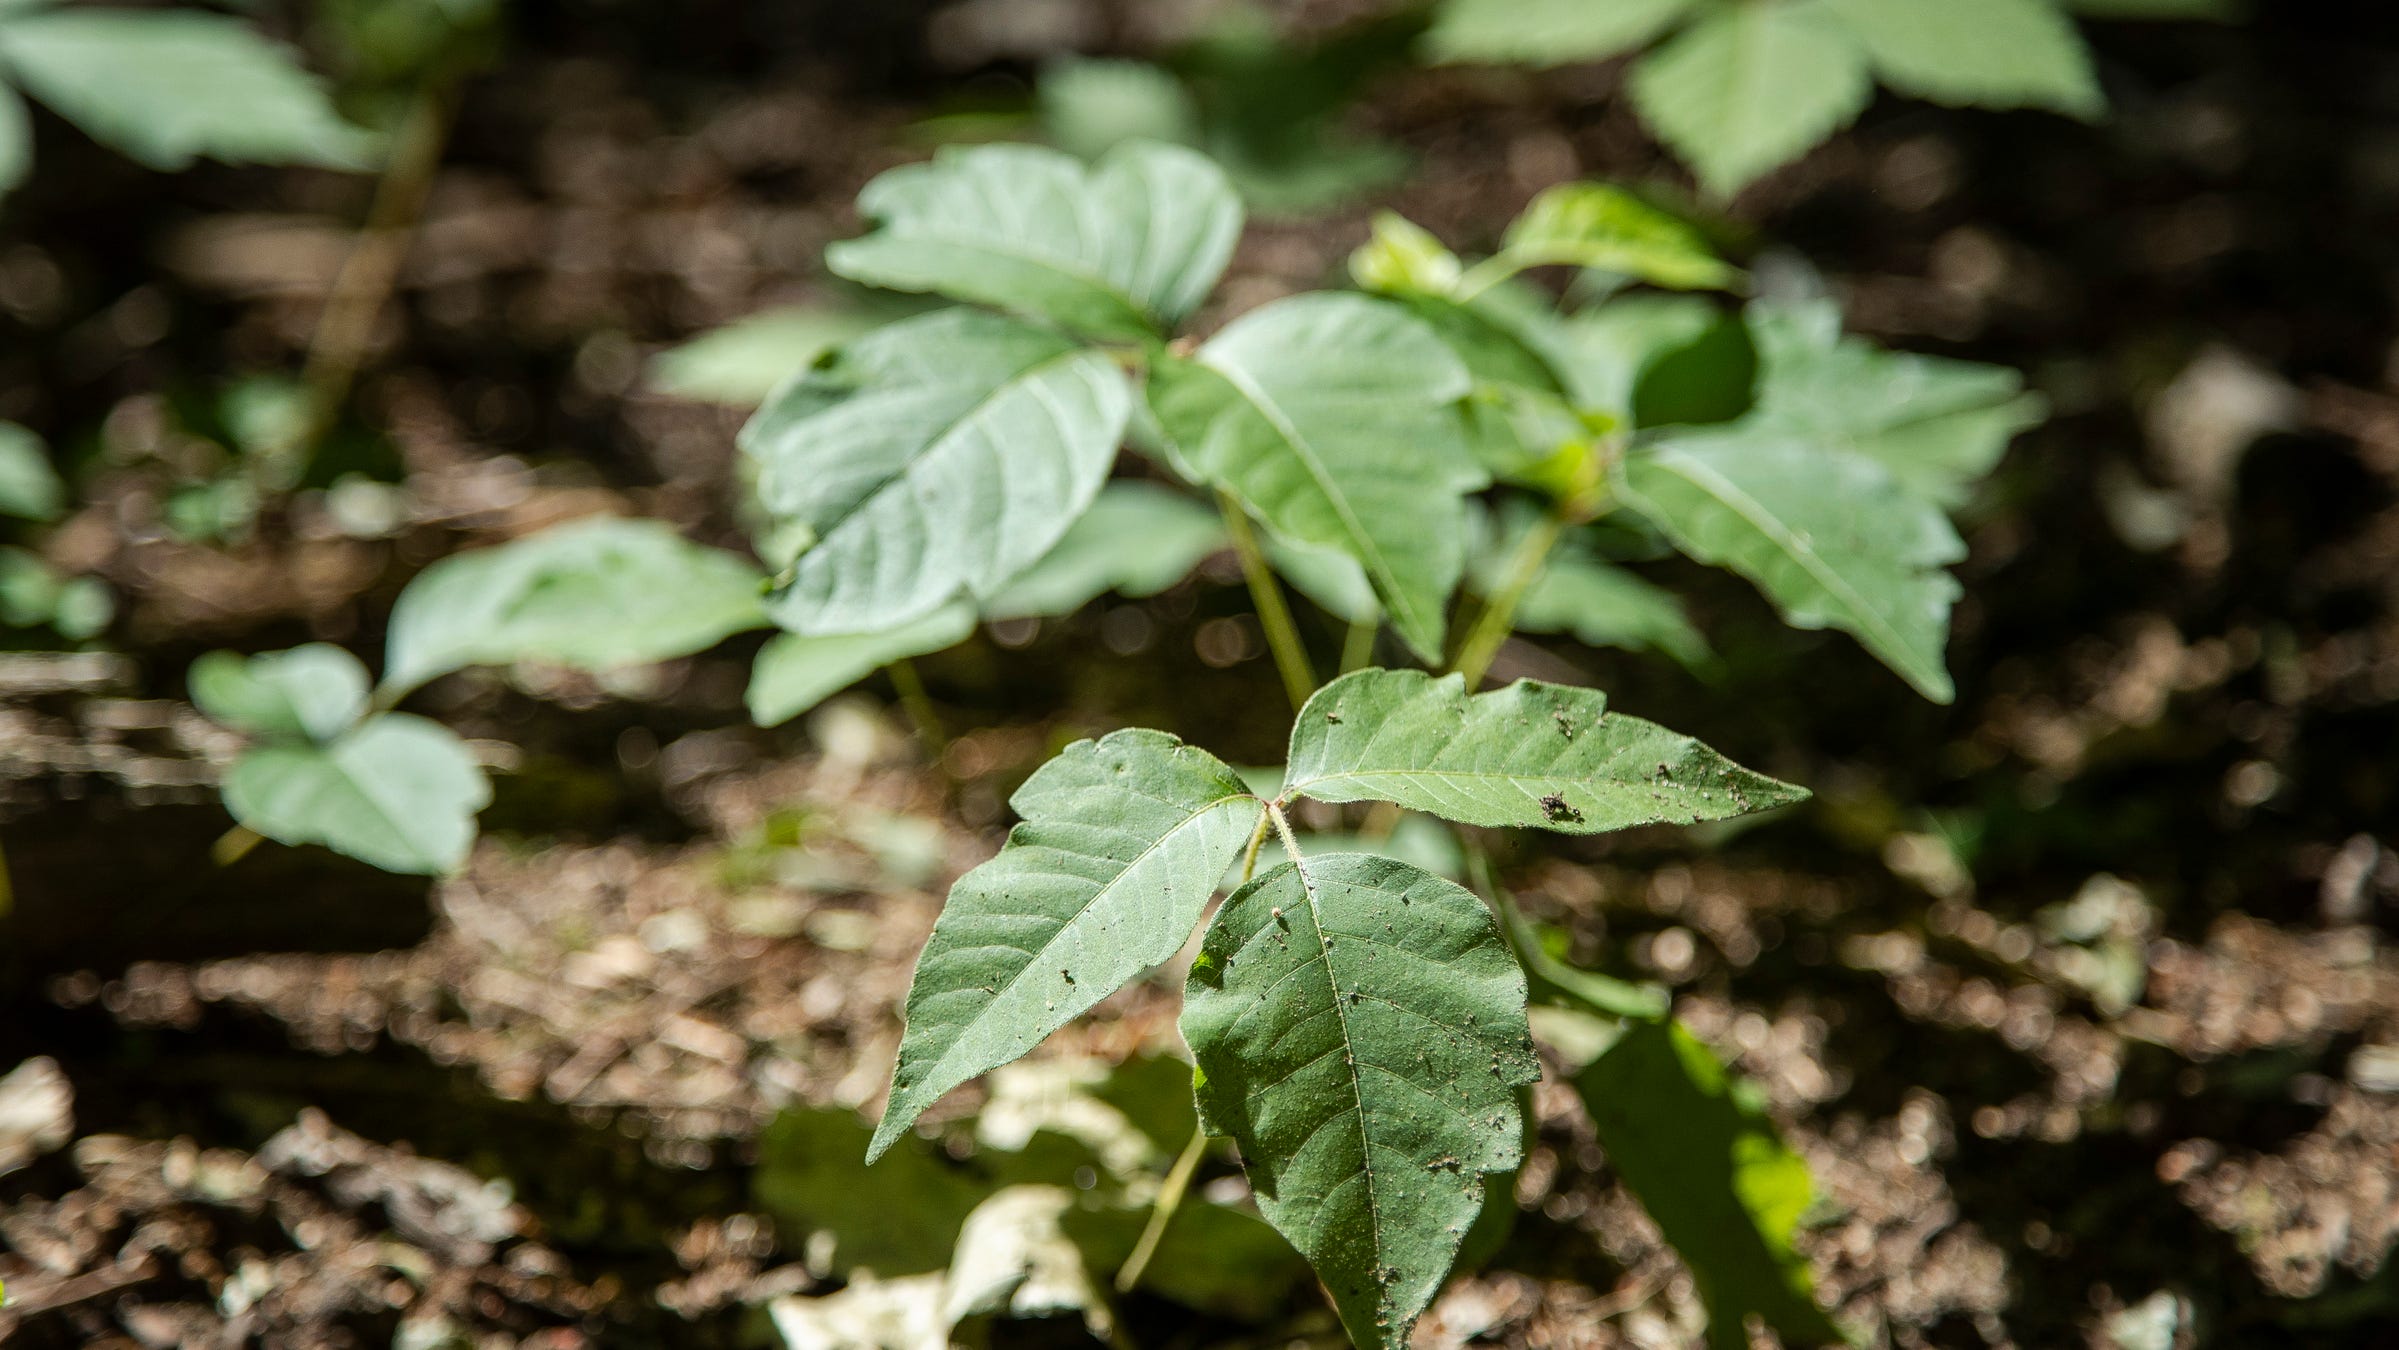 Poison ivy on the rise: What it looks like, how to avoid rash